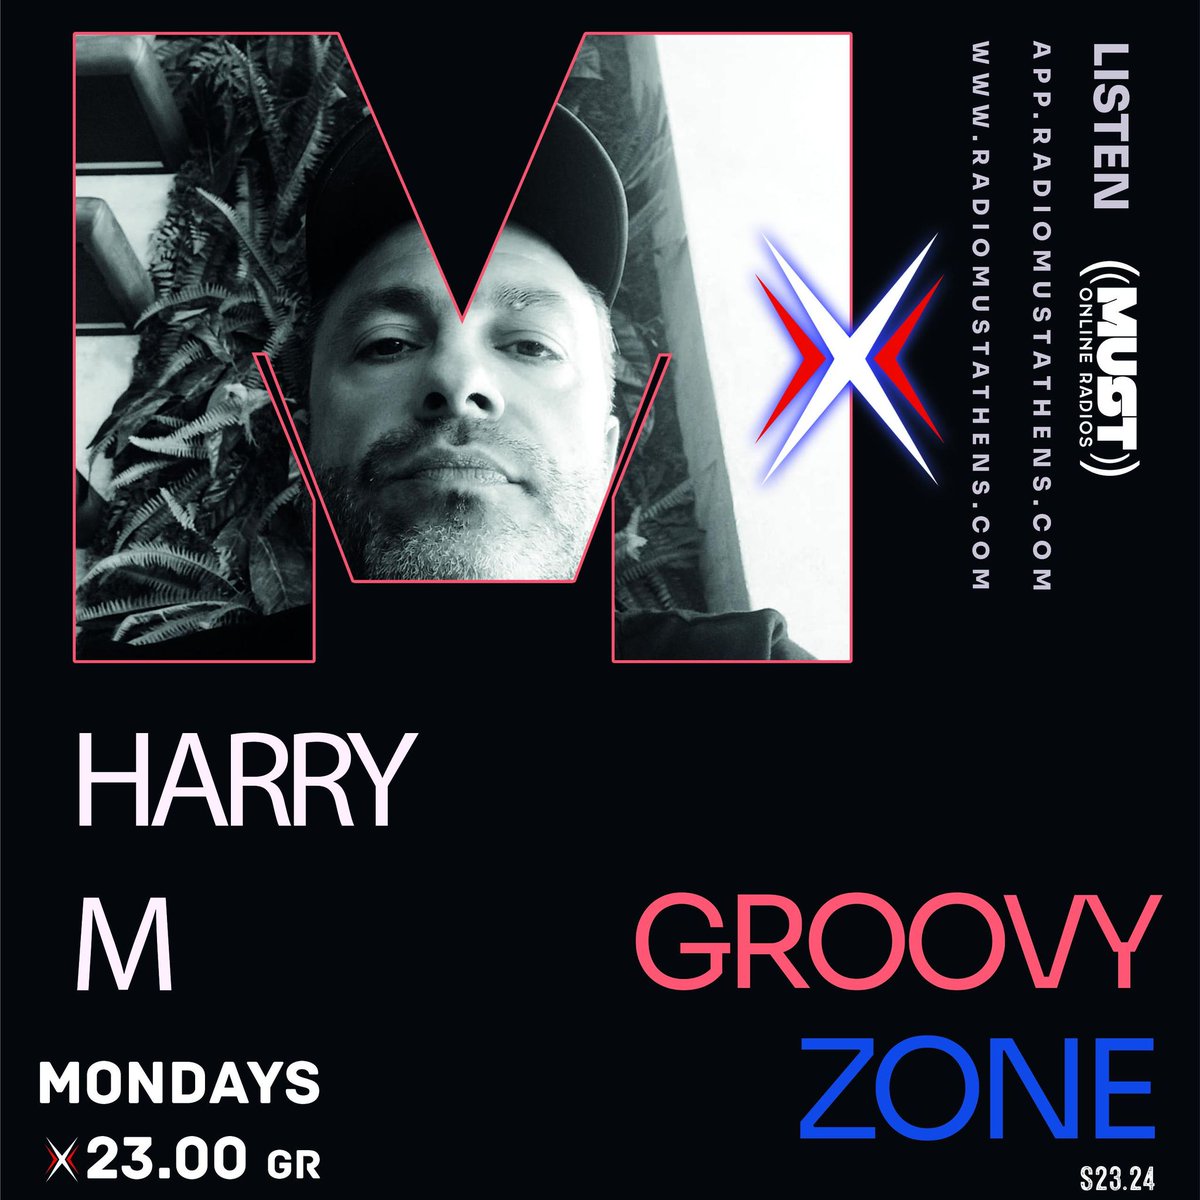 2night at 23:00 (GMT+2)

#MusicIsTheANSWER radio Show #287

#radiomustathens

@RadioMustAthens

app.radiomustathens.com

RadioMustAthens.com

#DjHarryM

linktr.ee/DjHarryM